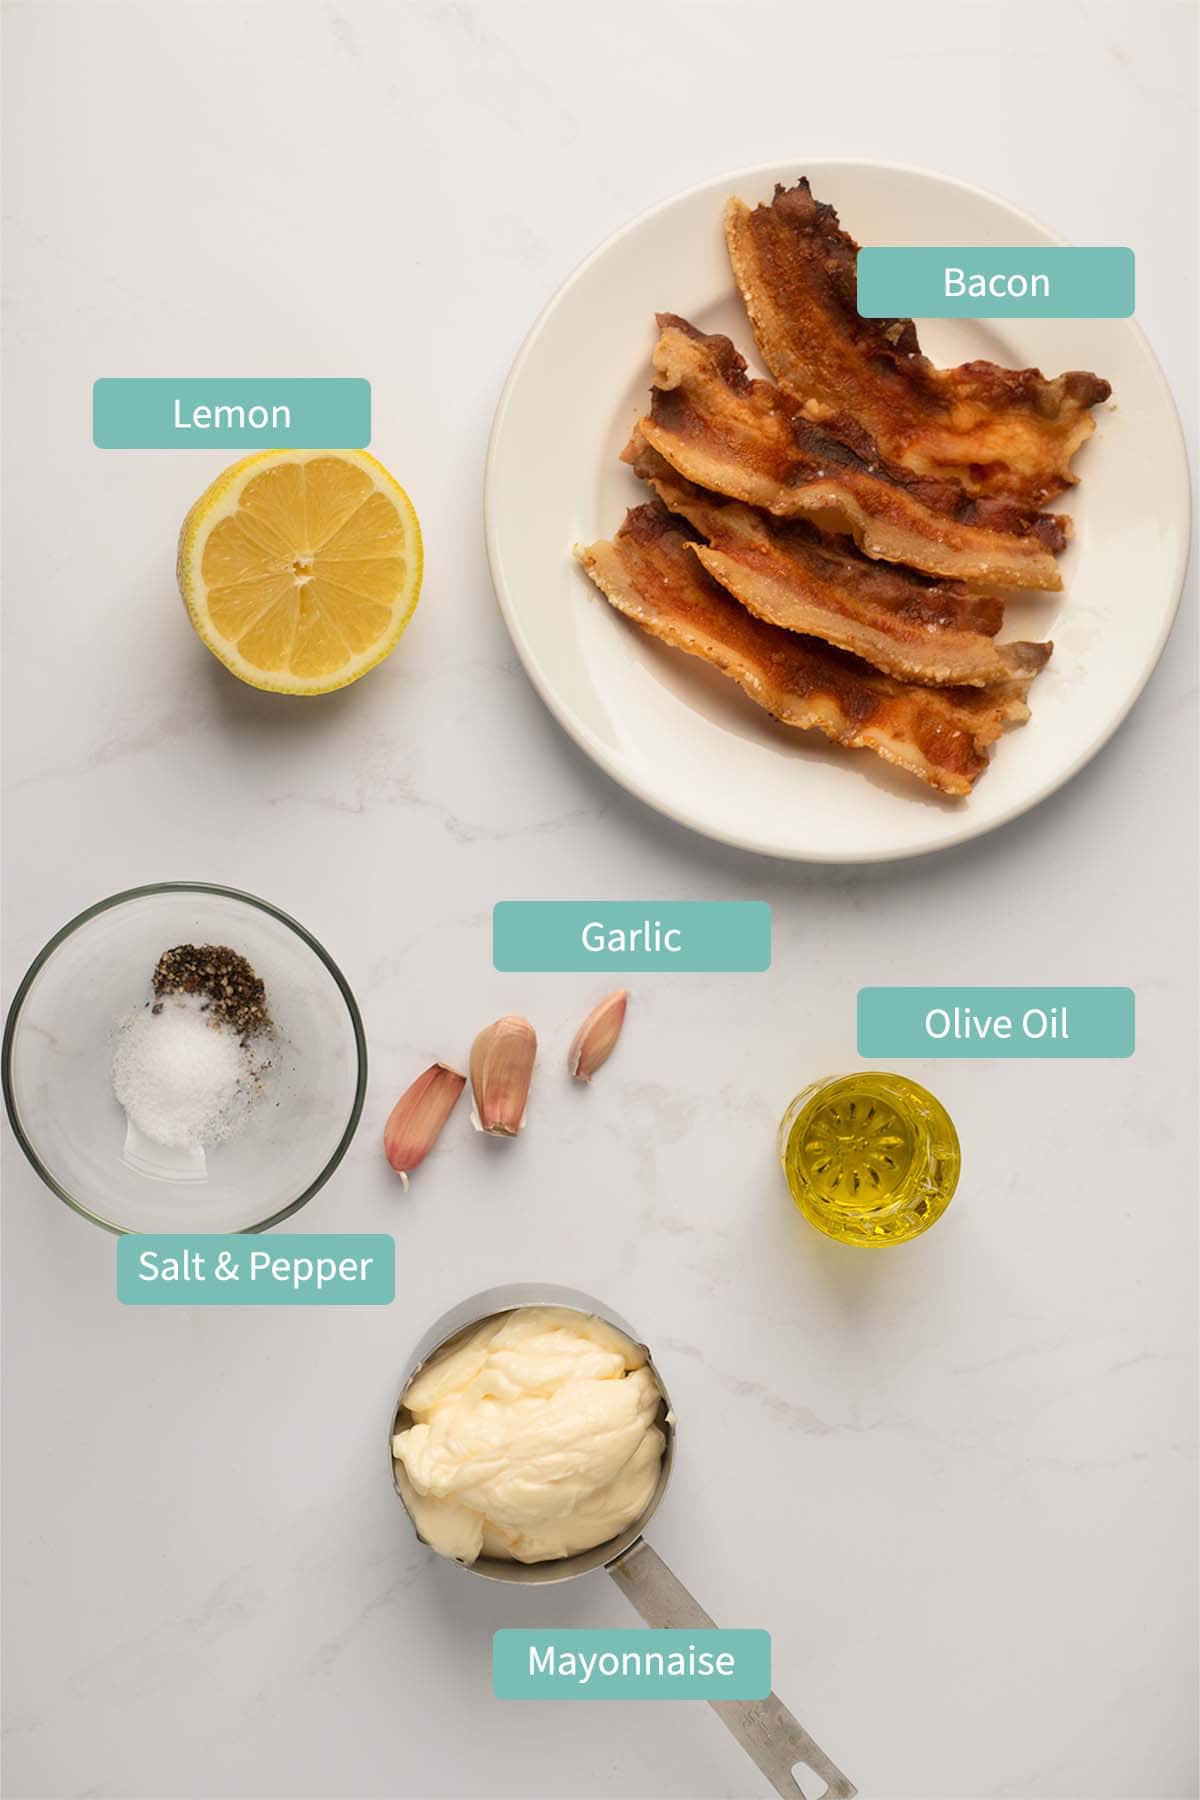 Ingredients as listed below for bacon aioli